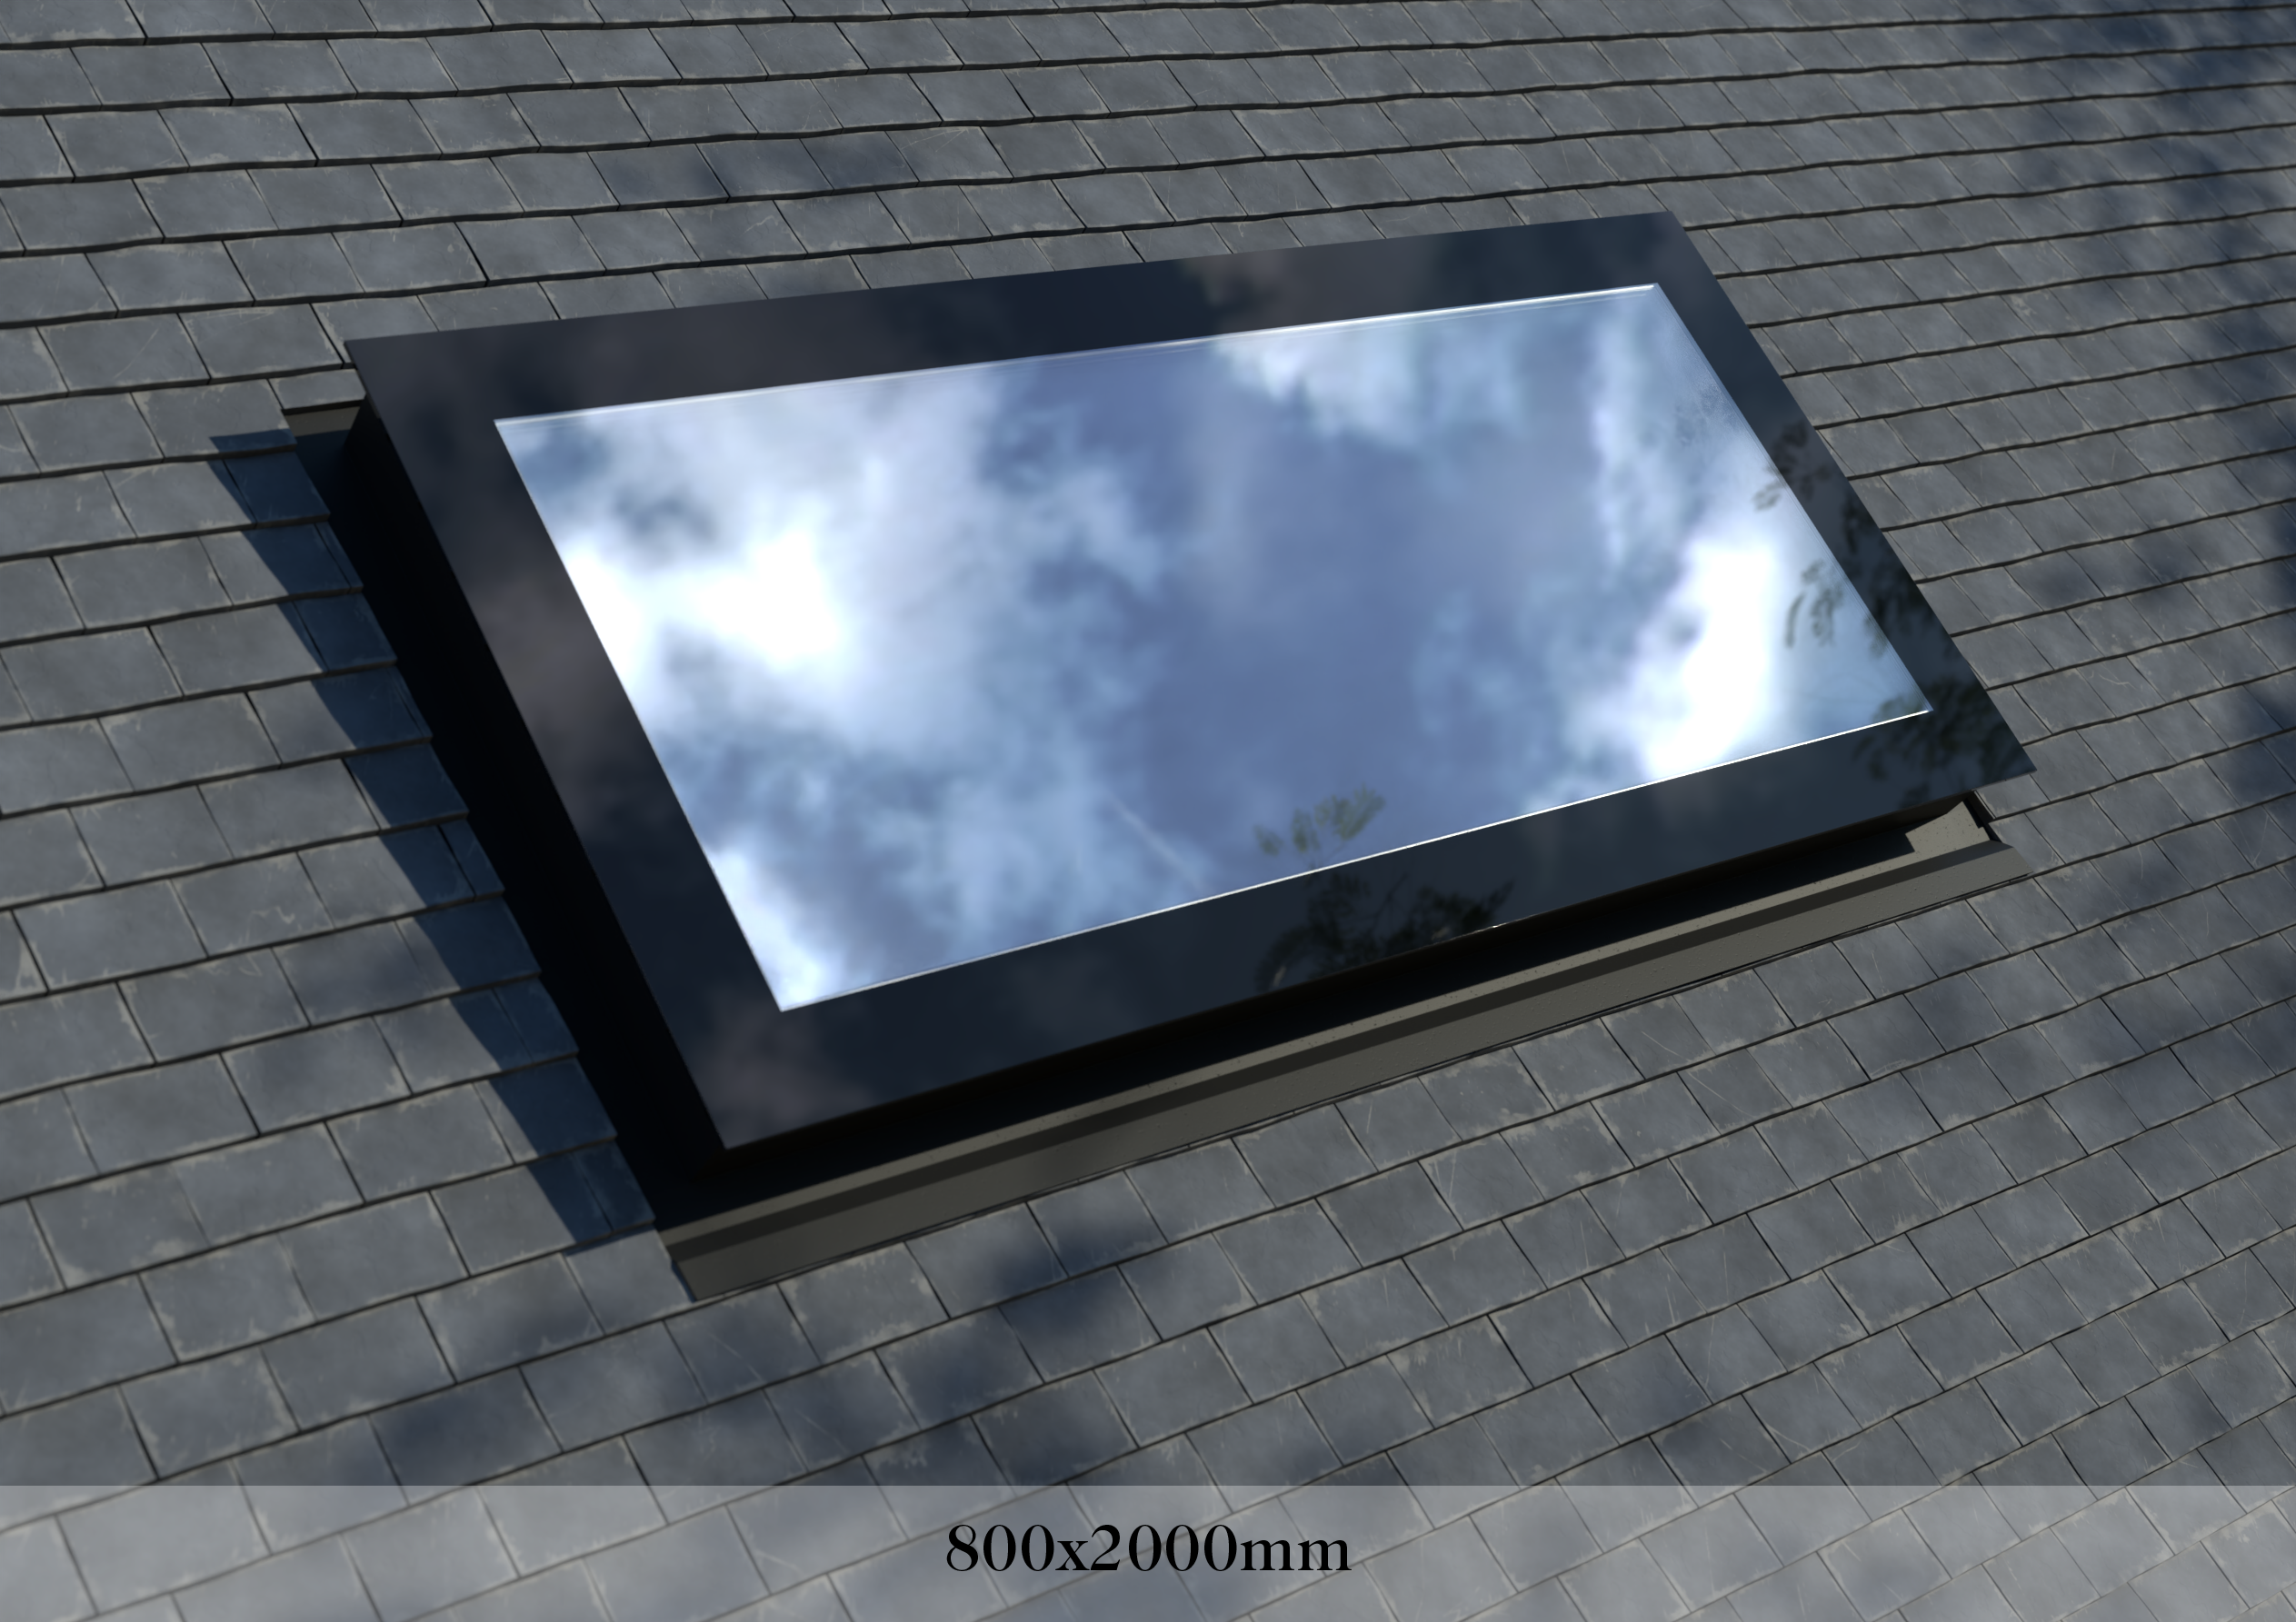 Pitched Roof Skylight 800 x 2000mm